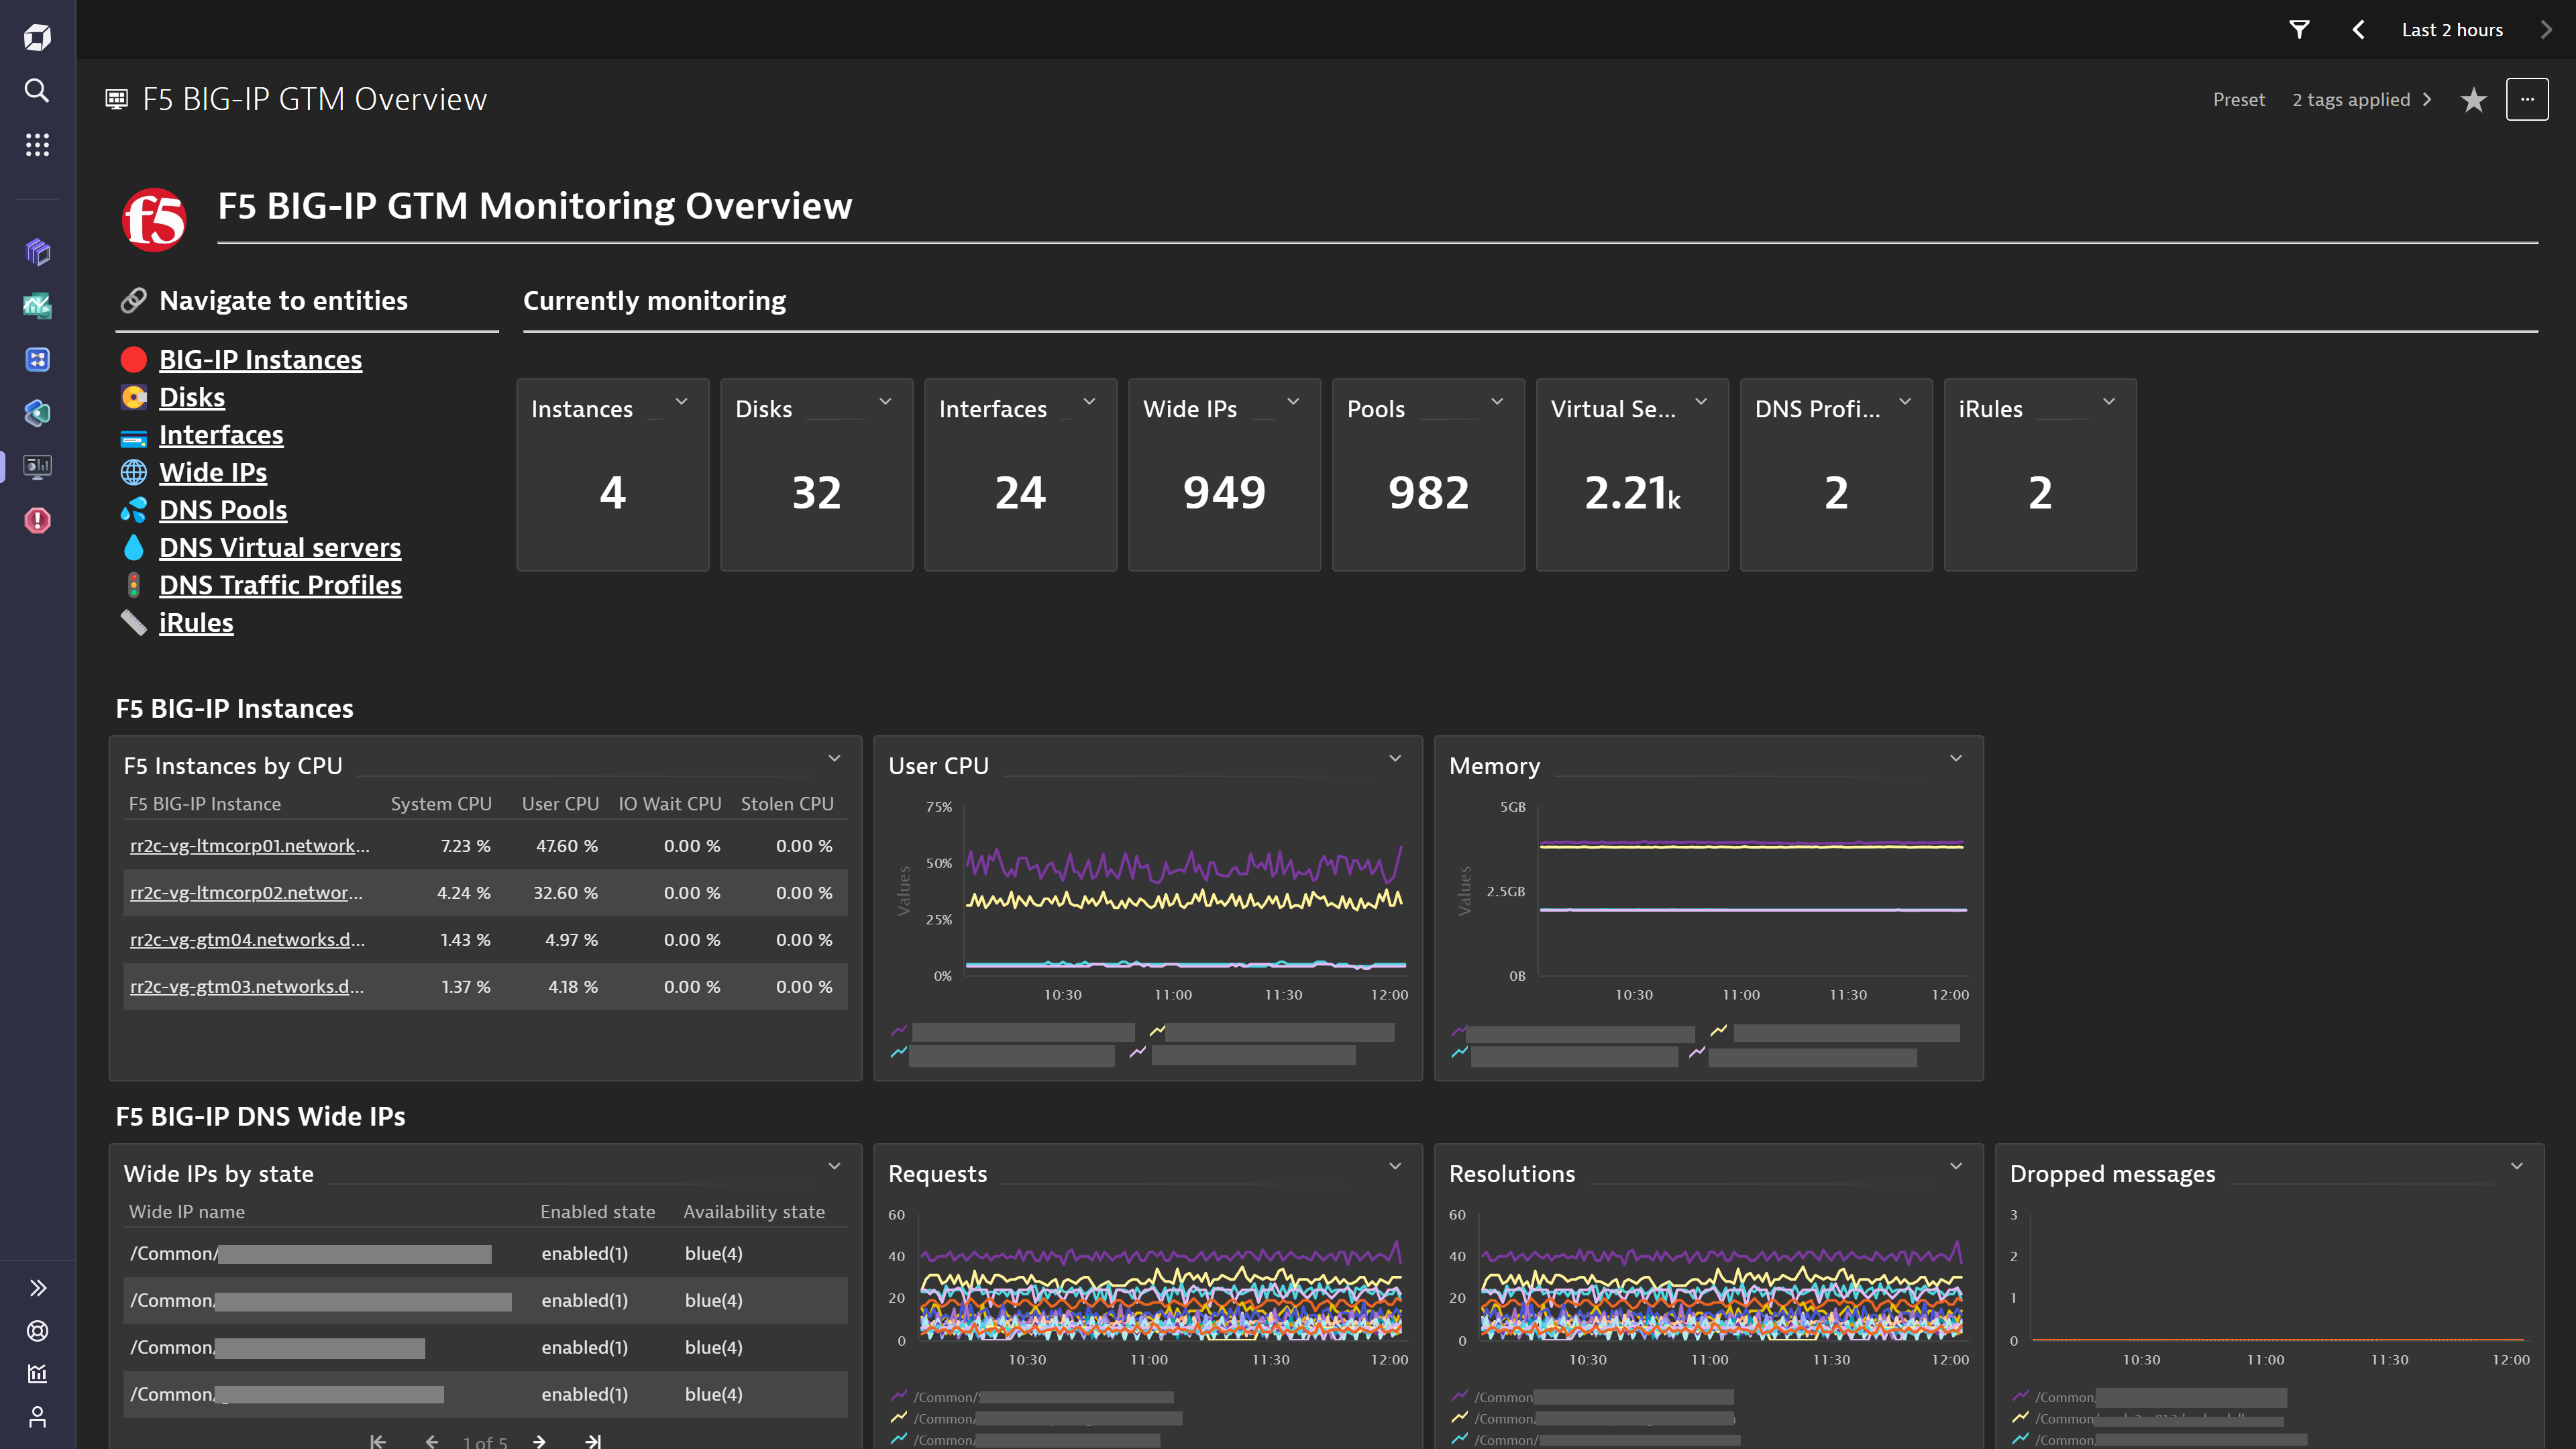 Overview dashboards are included for both LTM and DNS solutions, giving you an overview of the monitoring coverage. Use them as a starting point for troubleshooting and further drilldowns into your BIG-IP data.